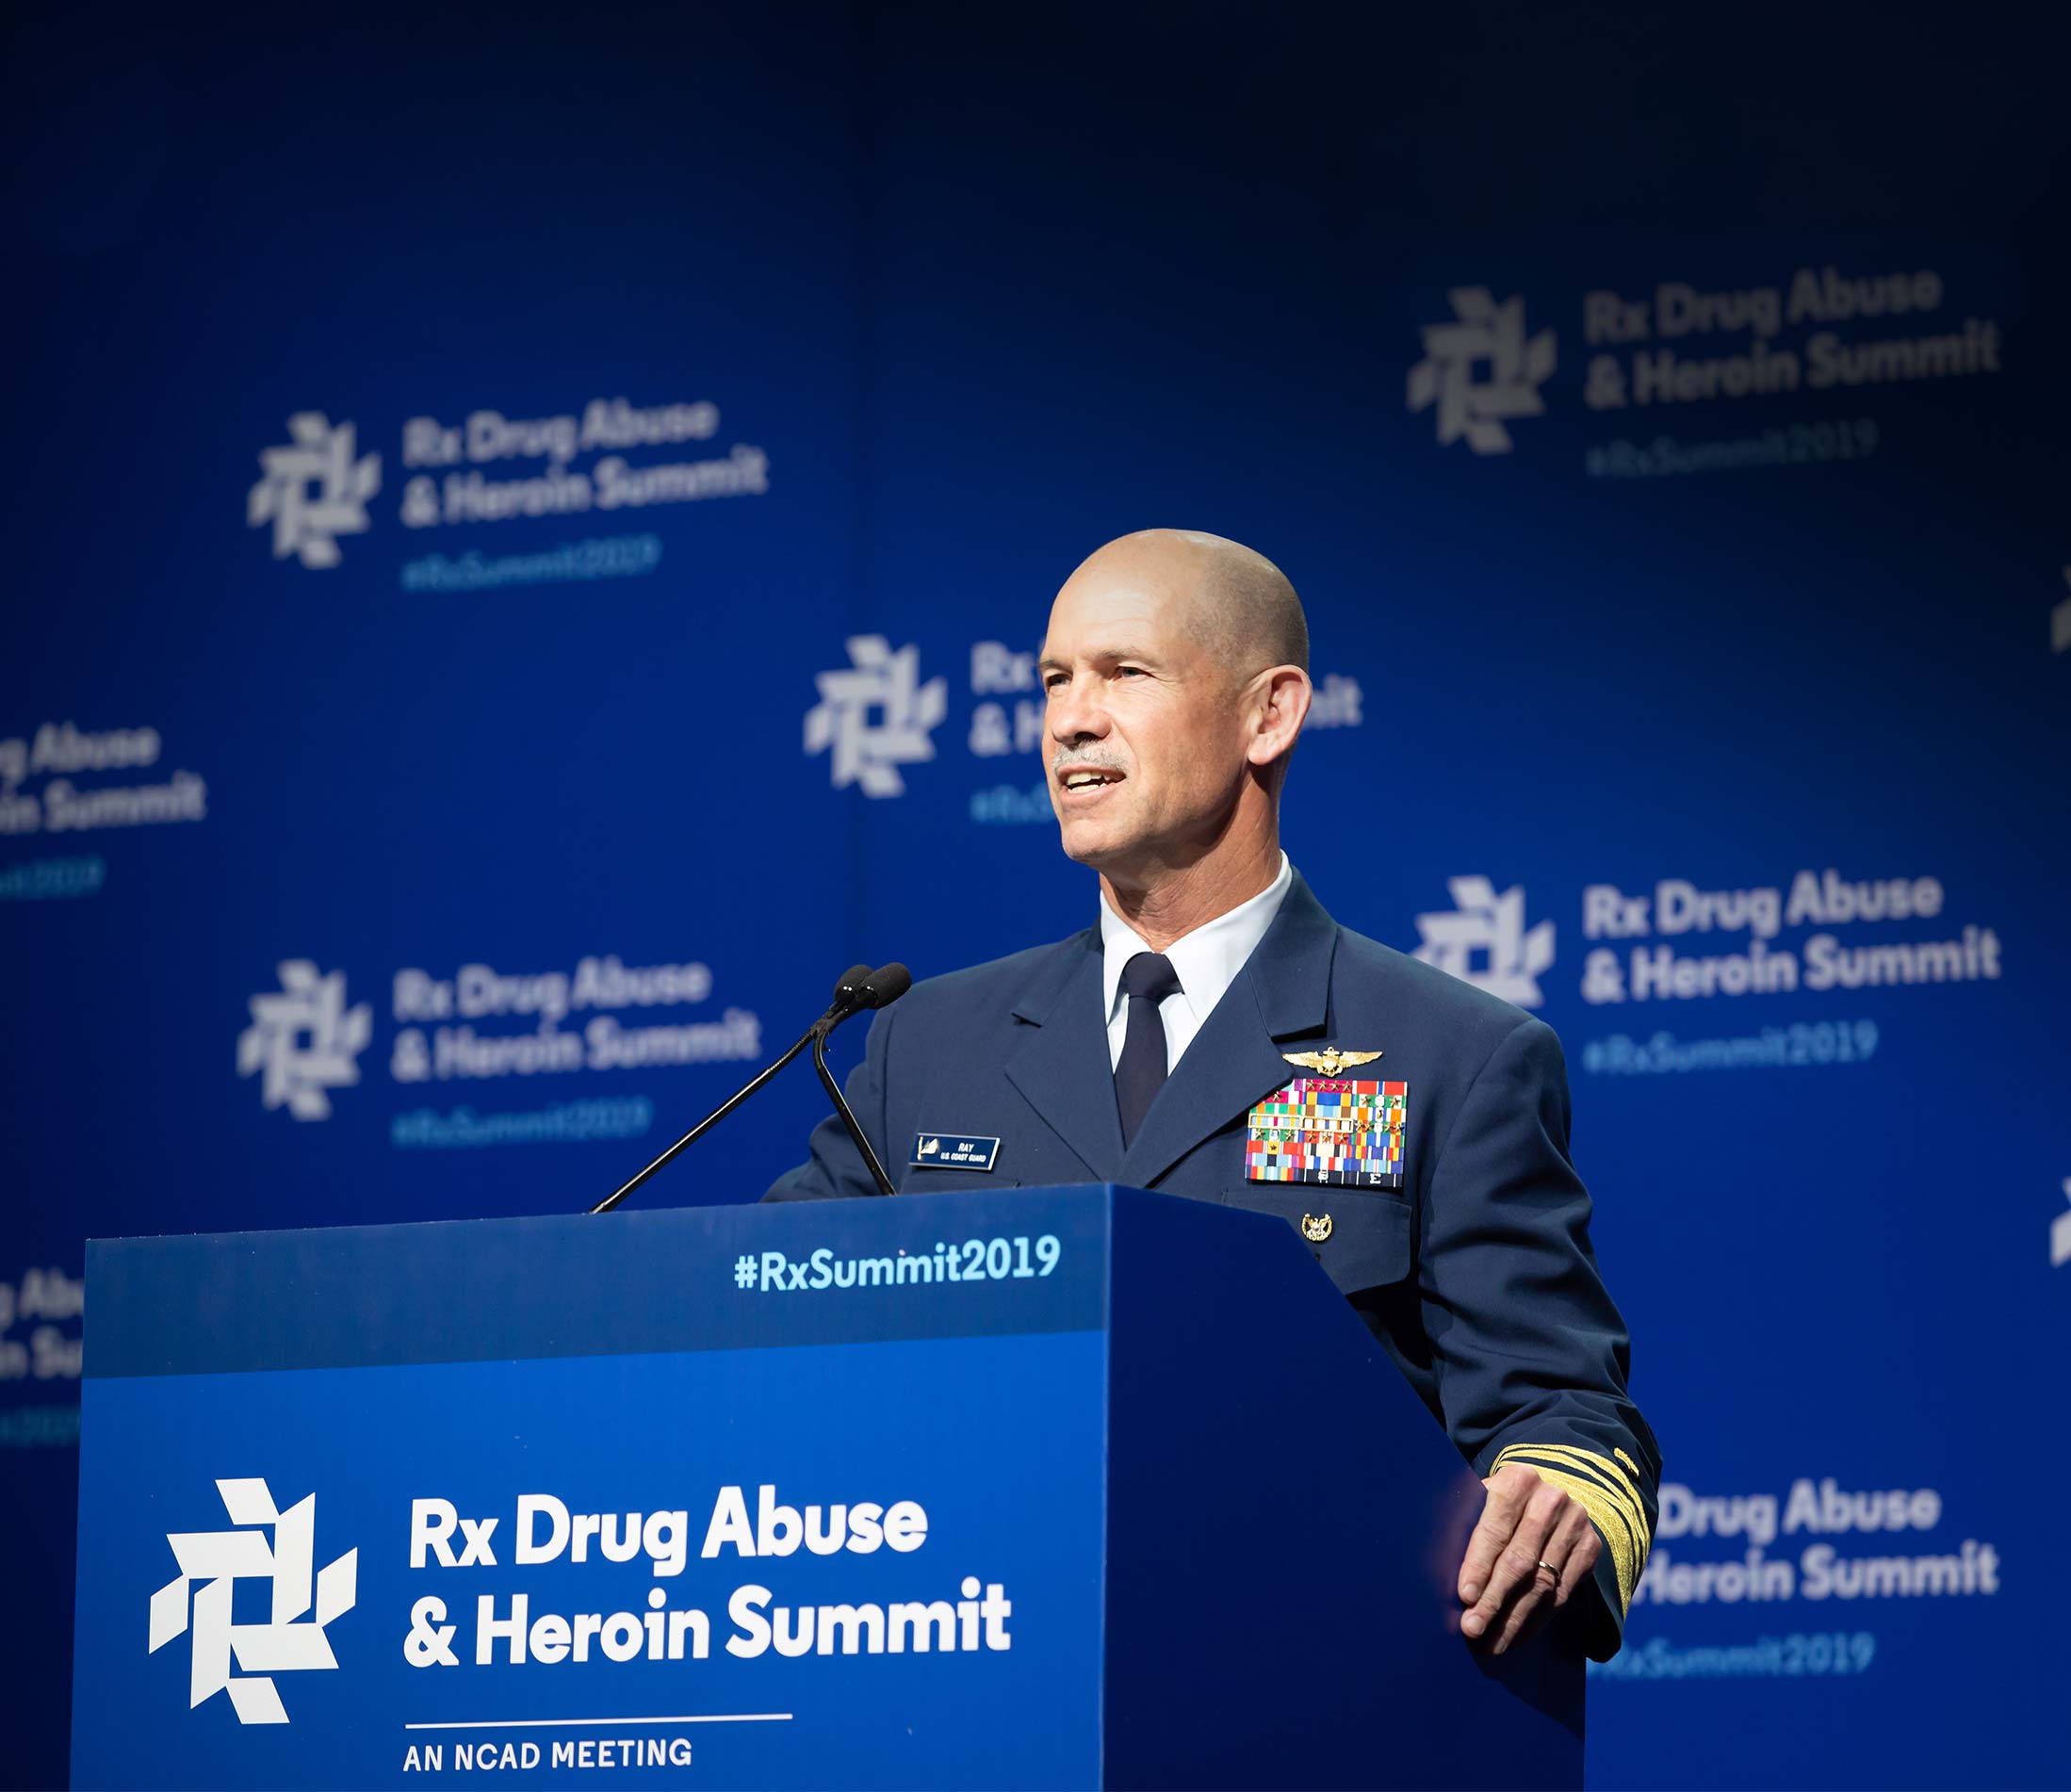 Rx Drug Abuse & Heroin Summit Opens 8th Annual Conference with Record